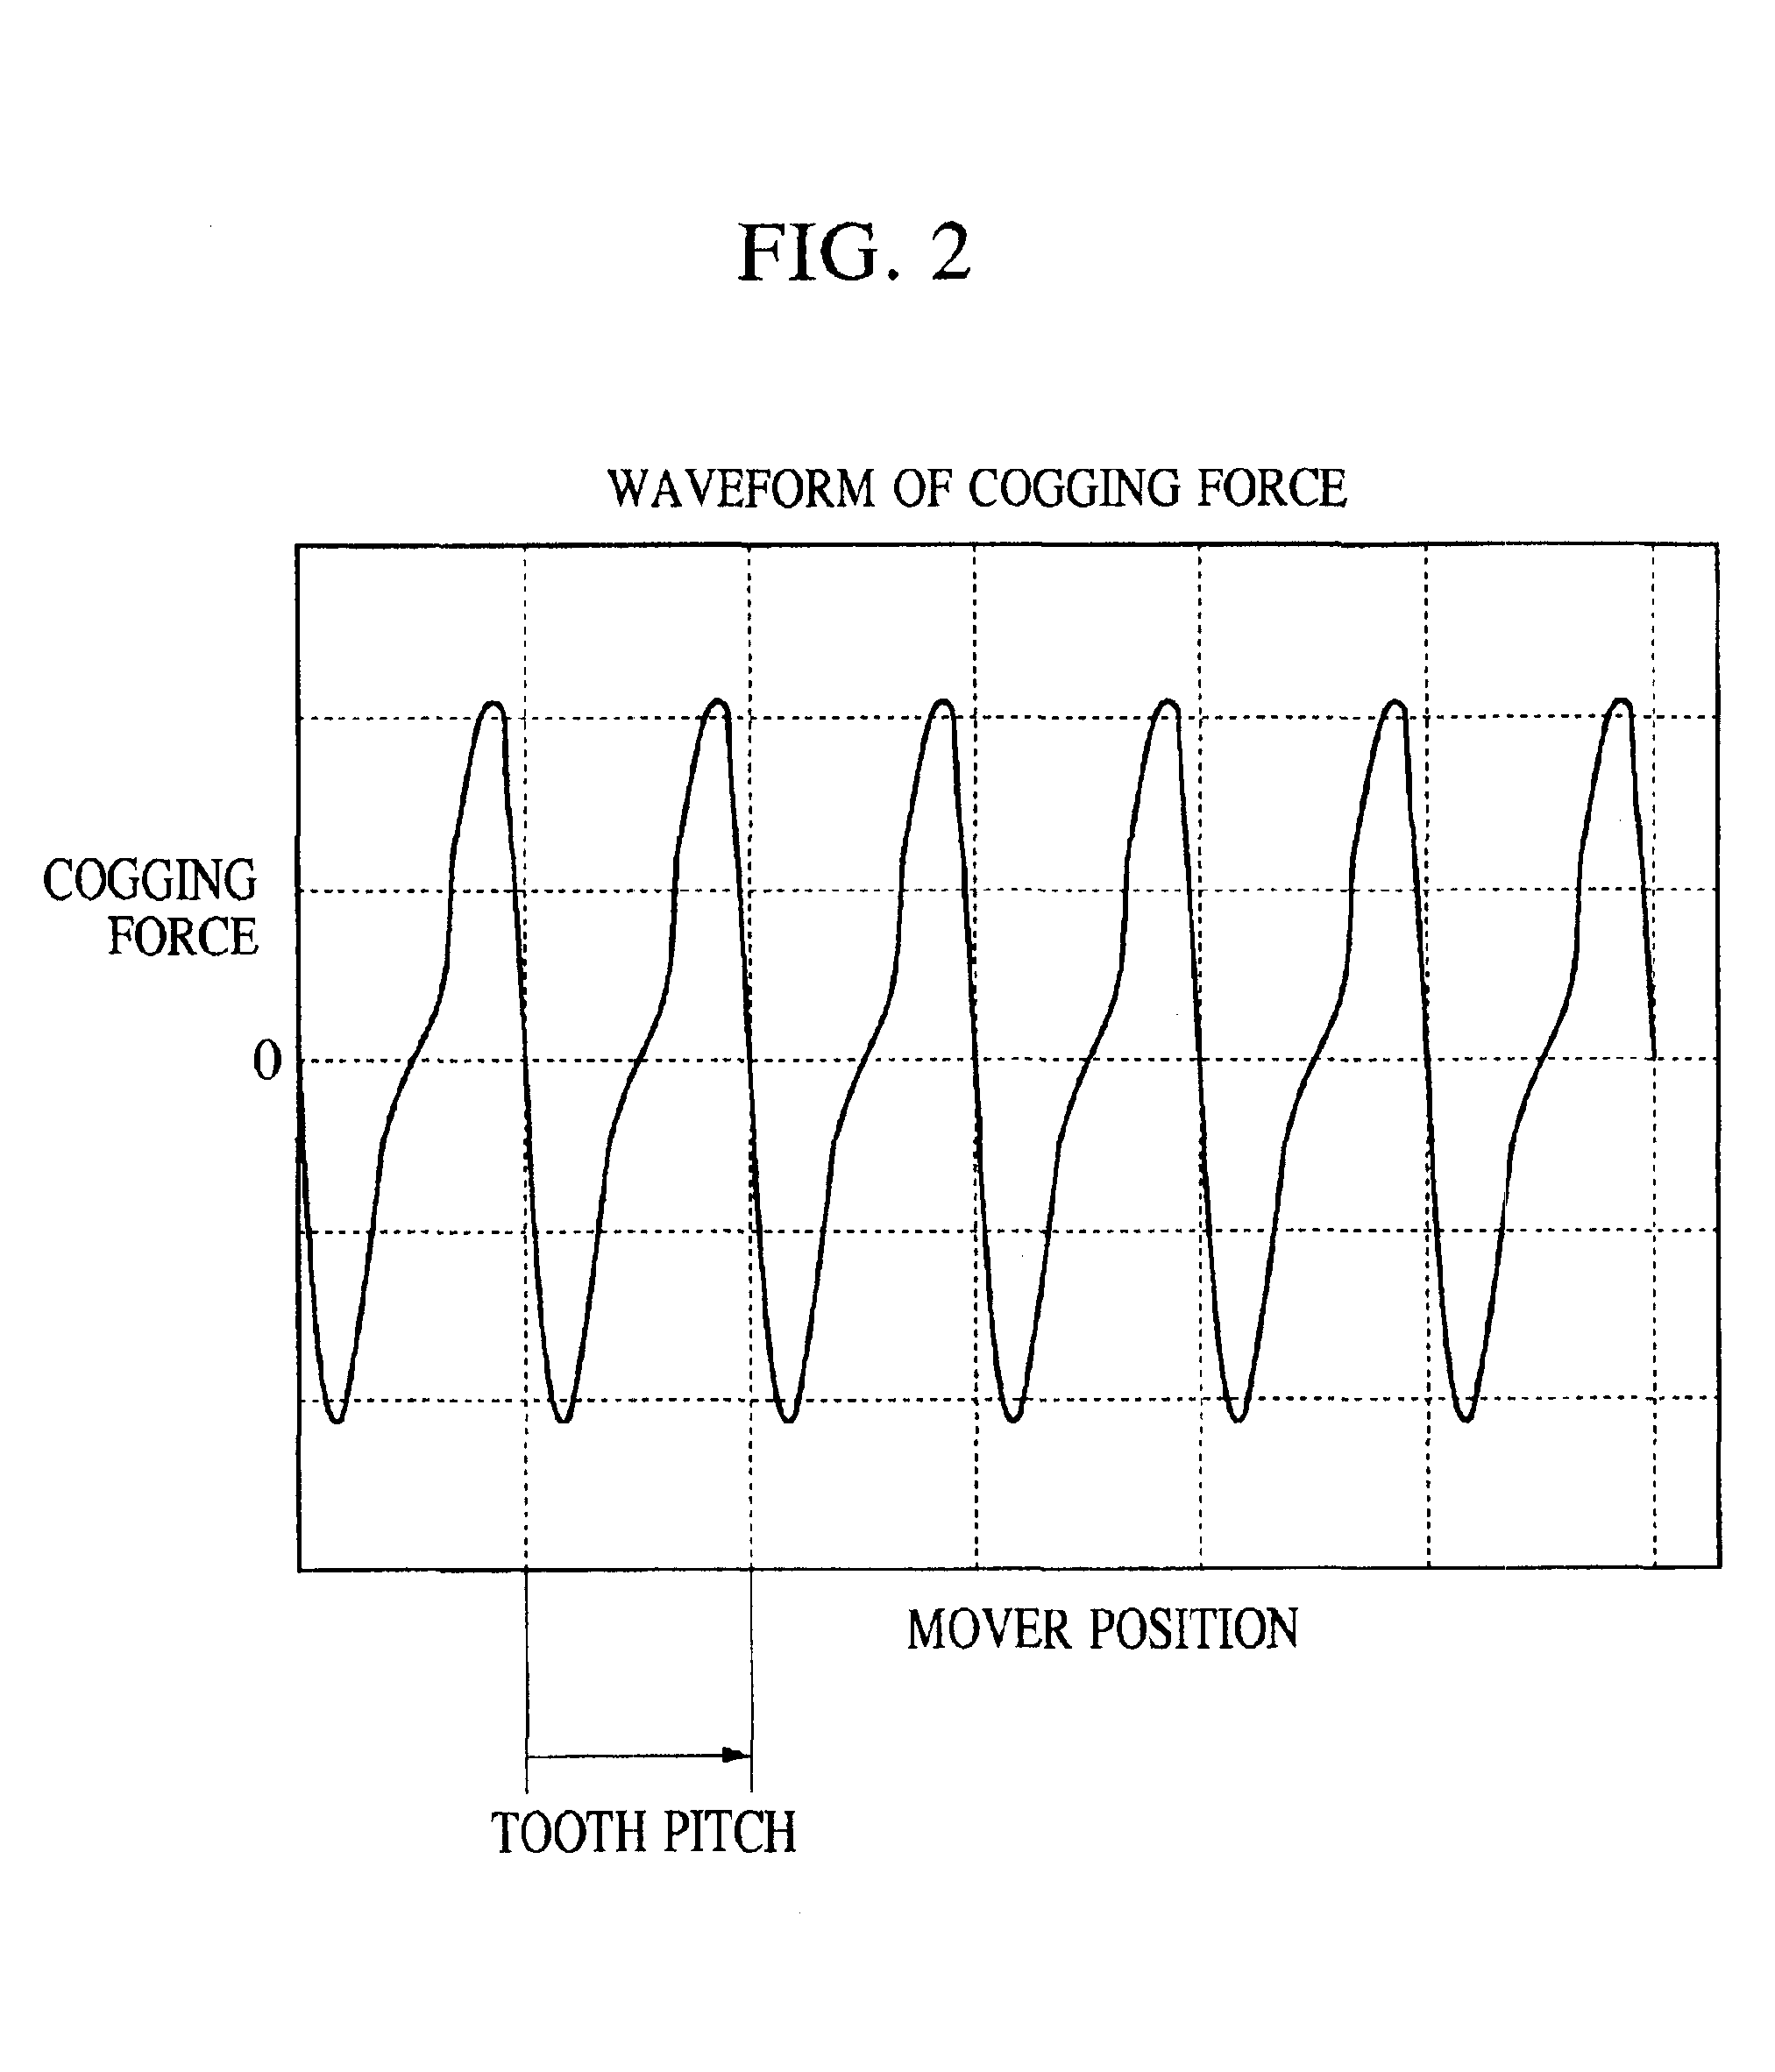 Moving-magnet linear motor, aligner and apparatus provided therewith, and method for manufacturing devices using the same